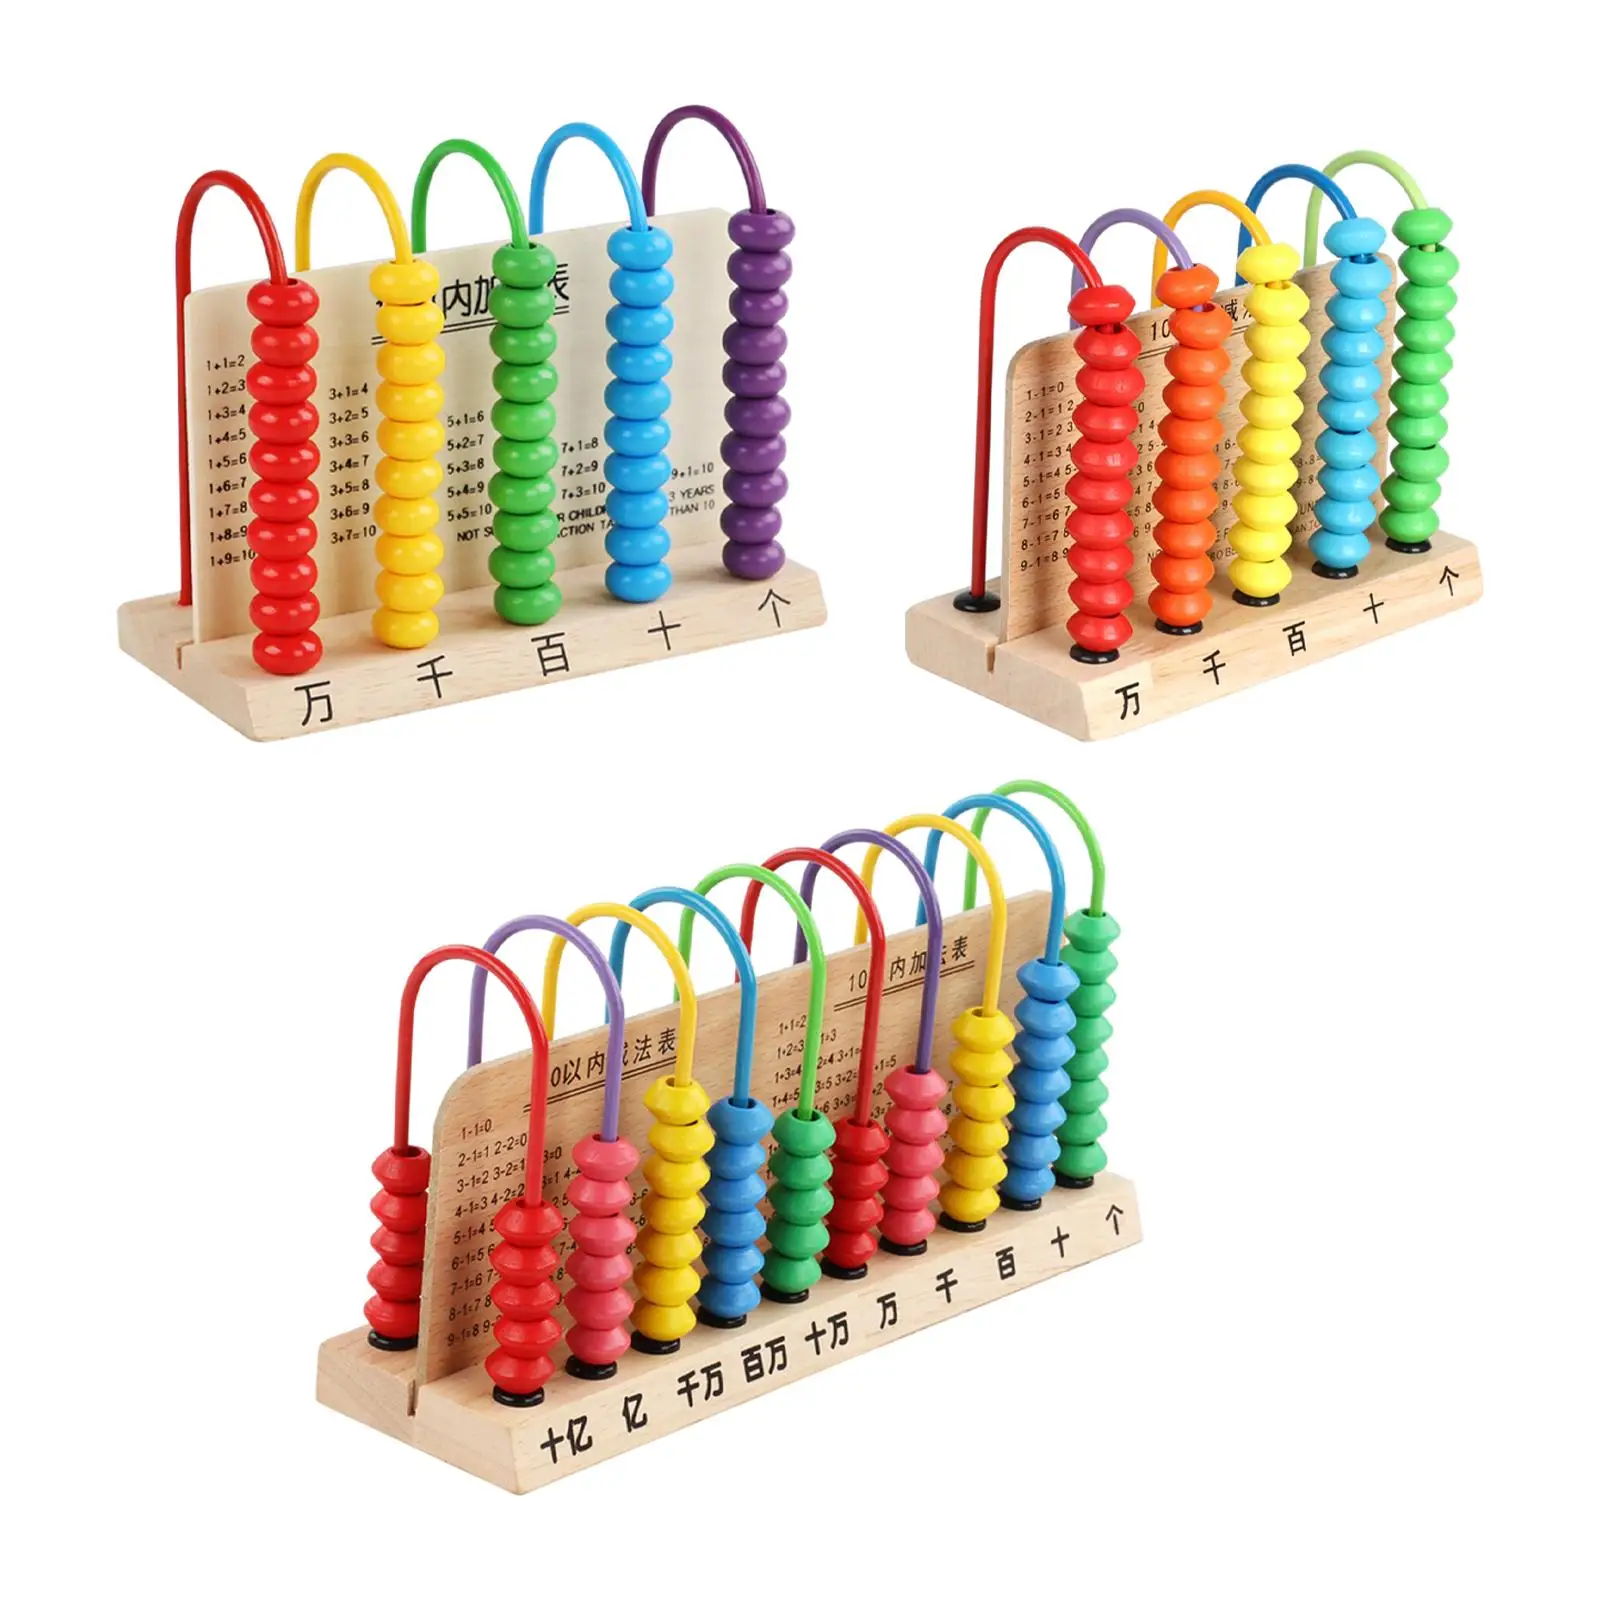 

Add Subtract Abacus Learn Math Wooden Montessori Gifts Classic Wooden Educational Counting Toy for Toddlers Baby Kindergarten